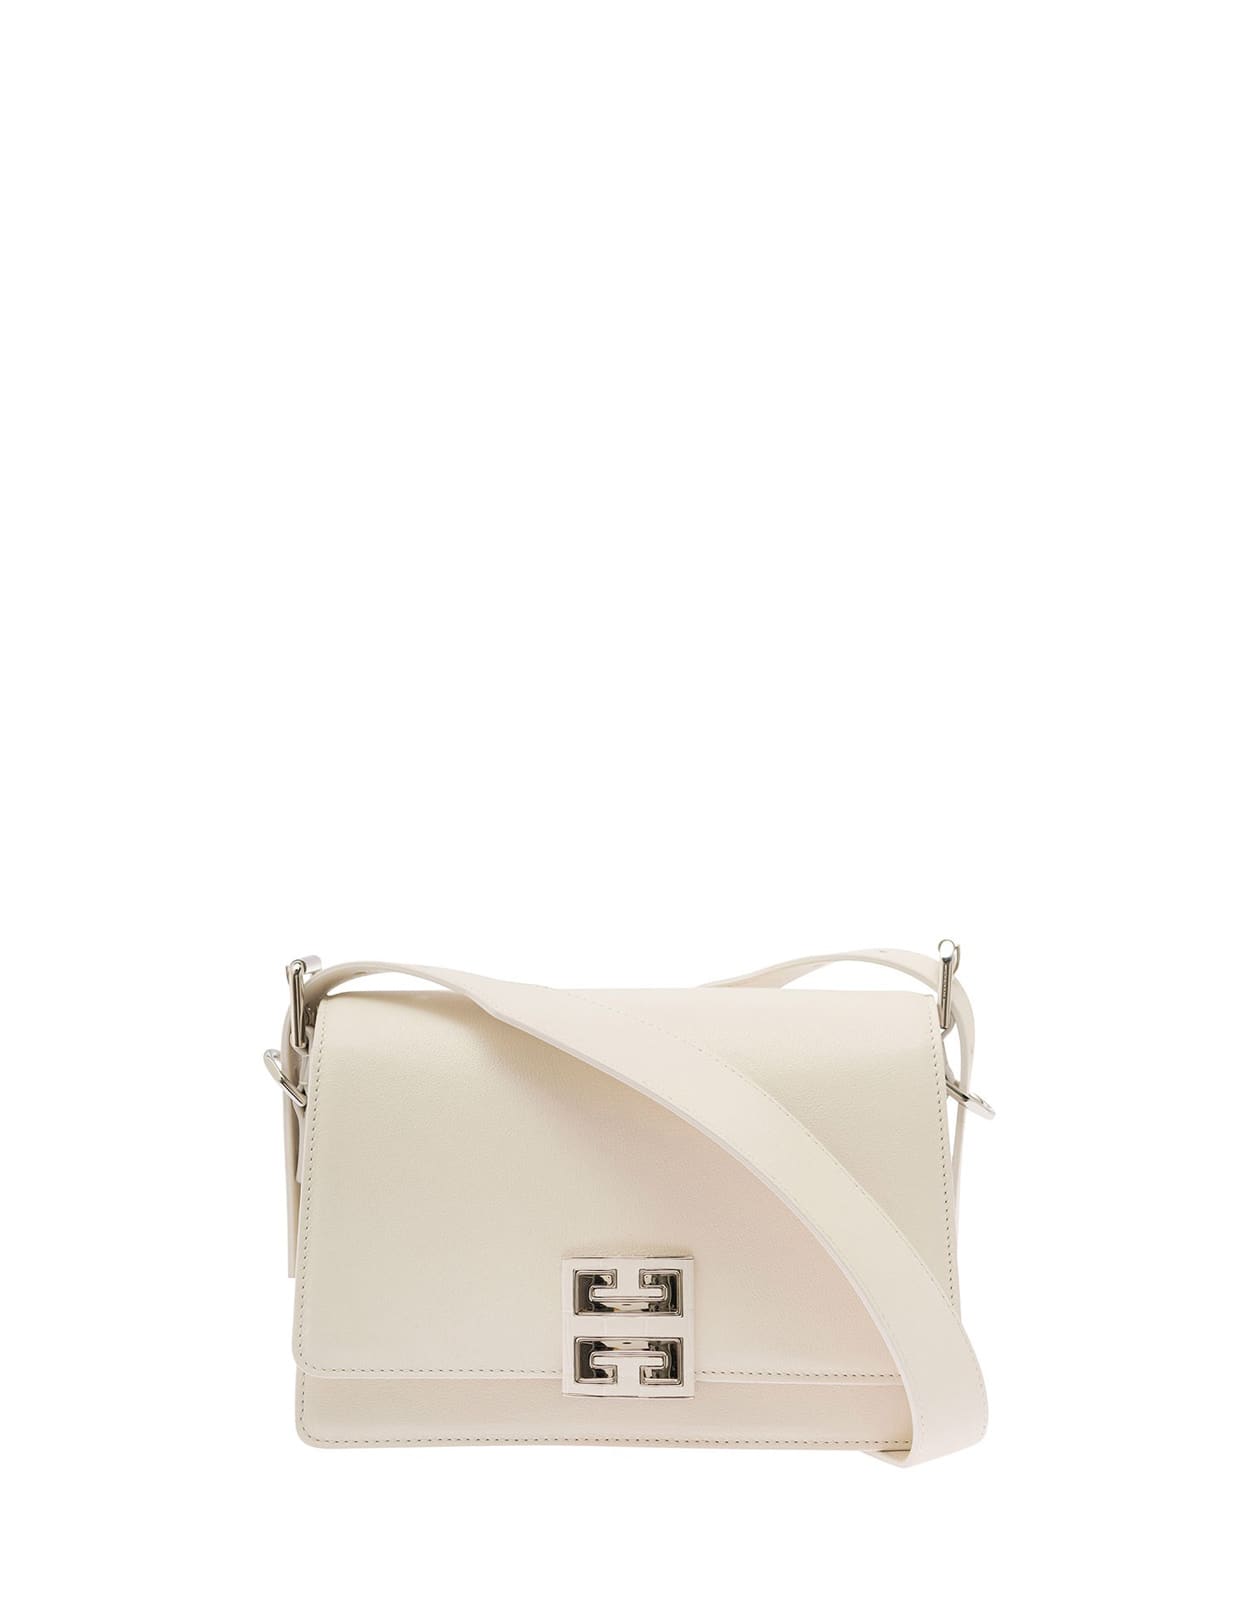 GIVENCHY 4G CROSSBODY BAG IN IVORY BOX LEATHER